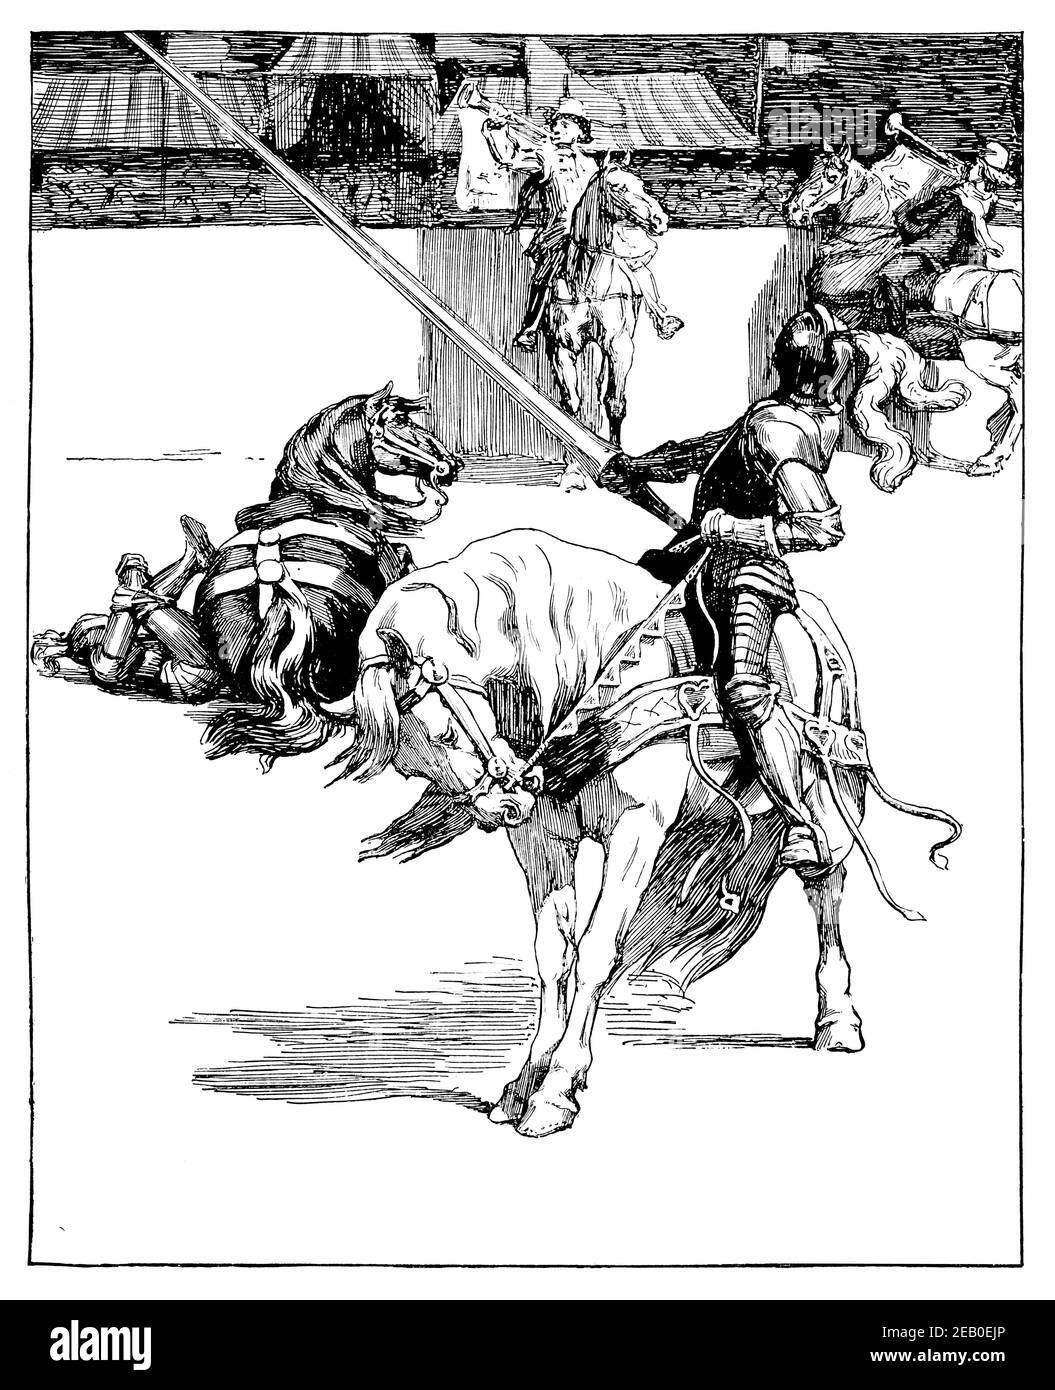 Ivanhoe illustration, medieval knights jousting, illustration by Edwin Noble in 1898 The Studio an Illustrated Magazine of Fine and Applied Art Stock Photo